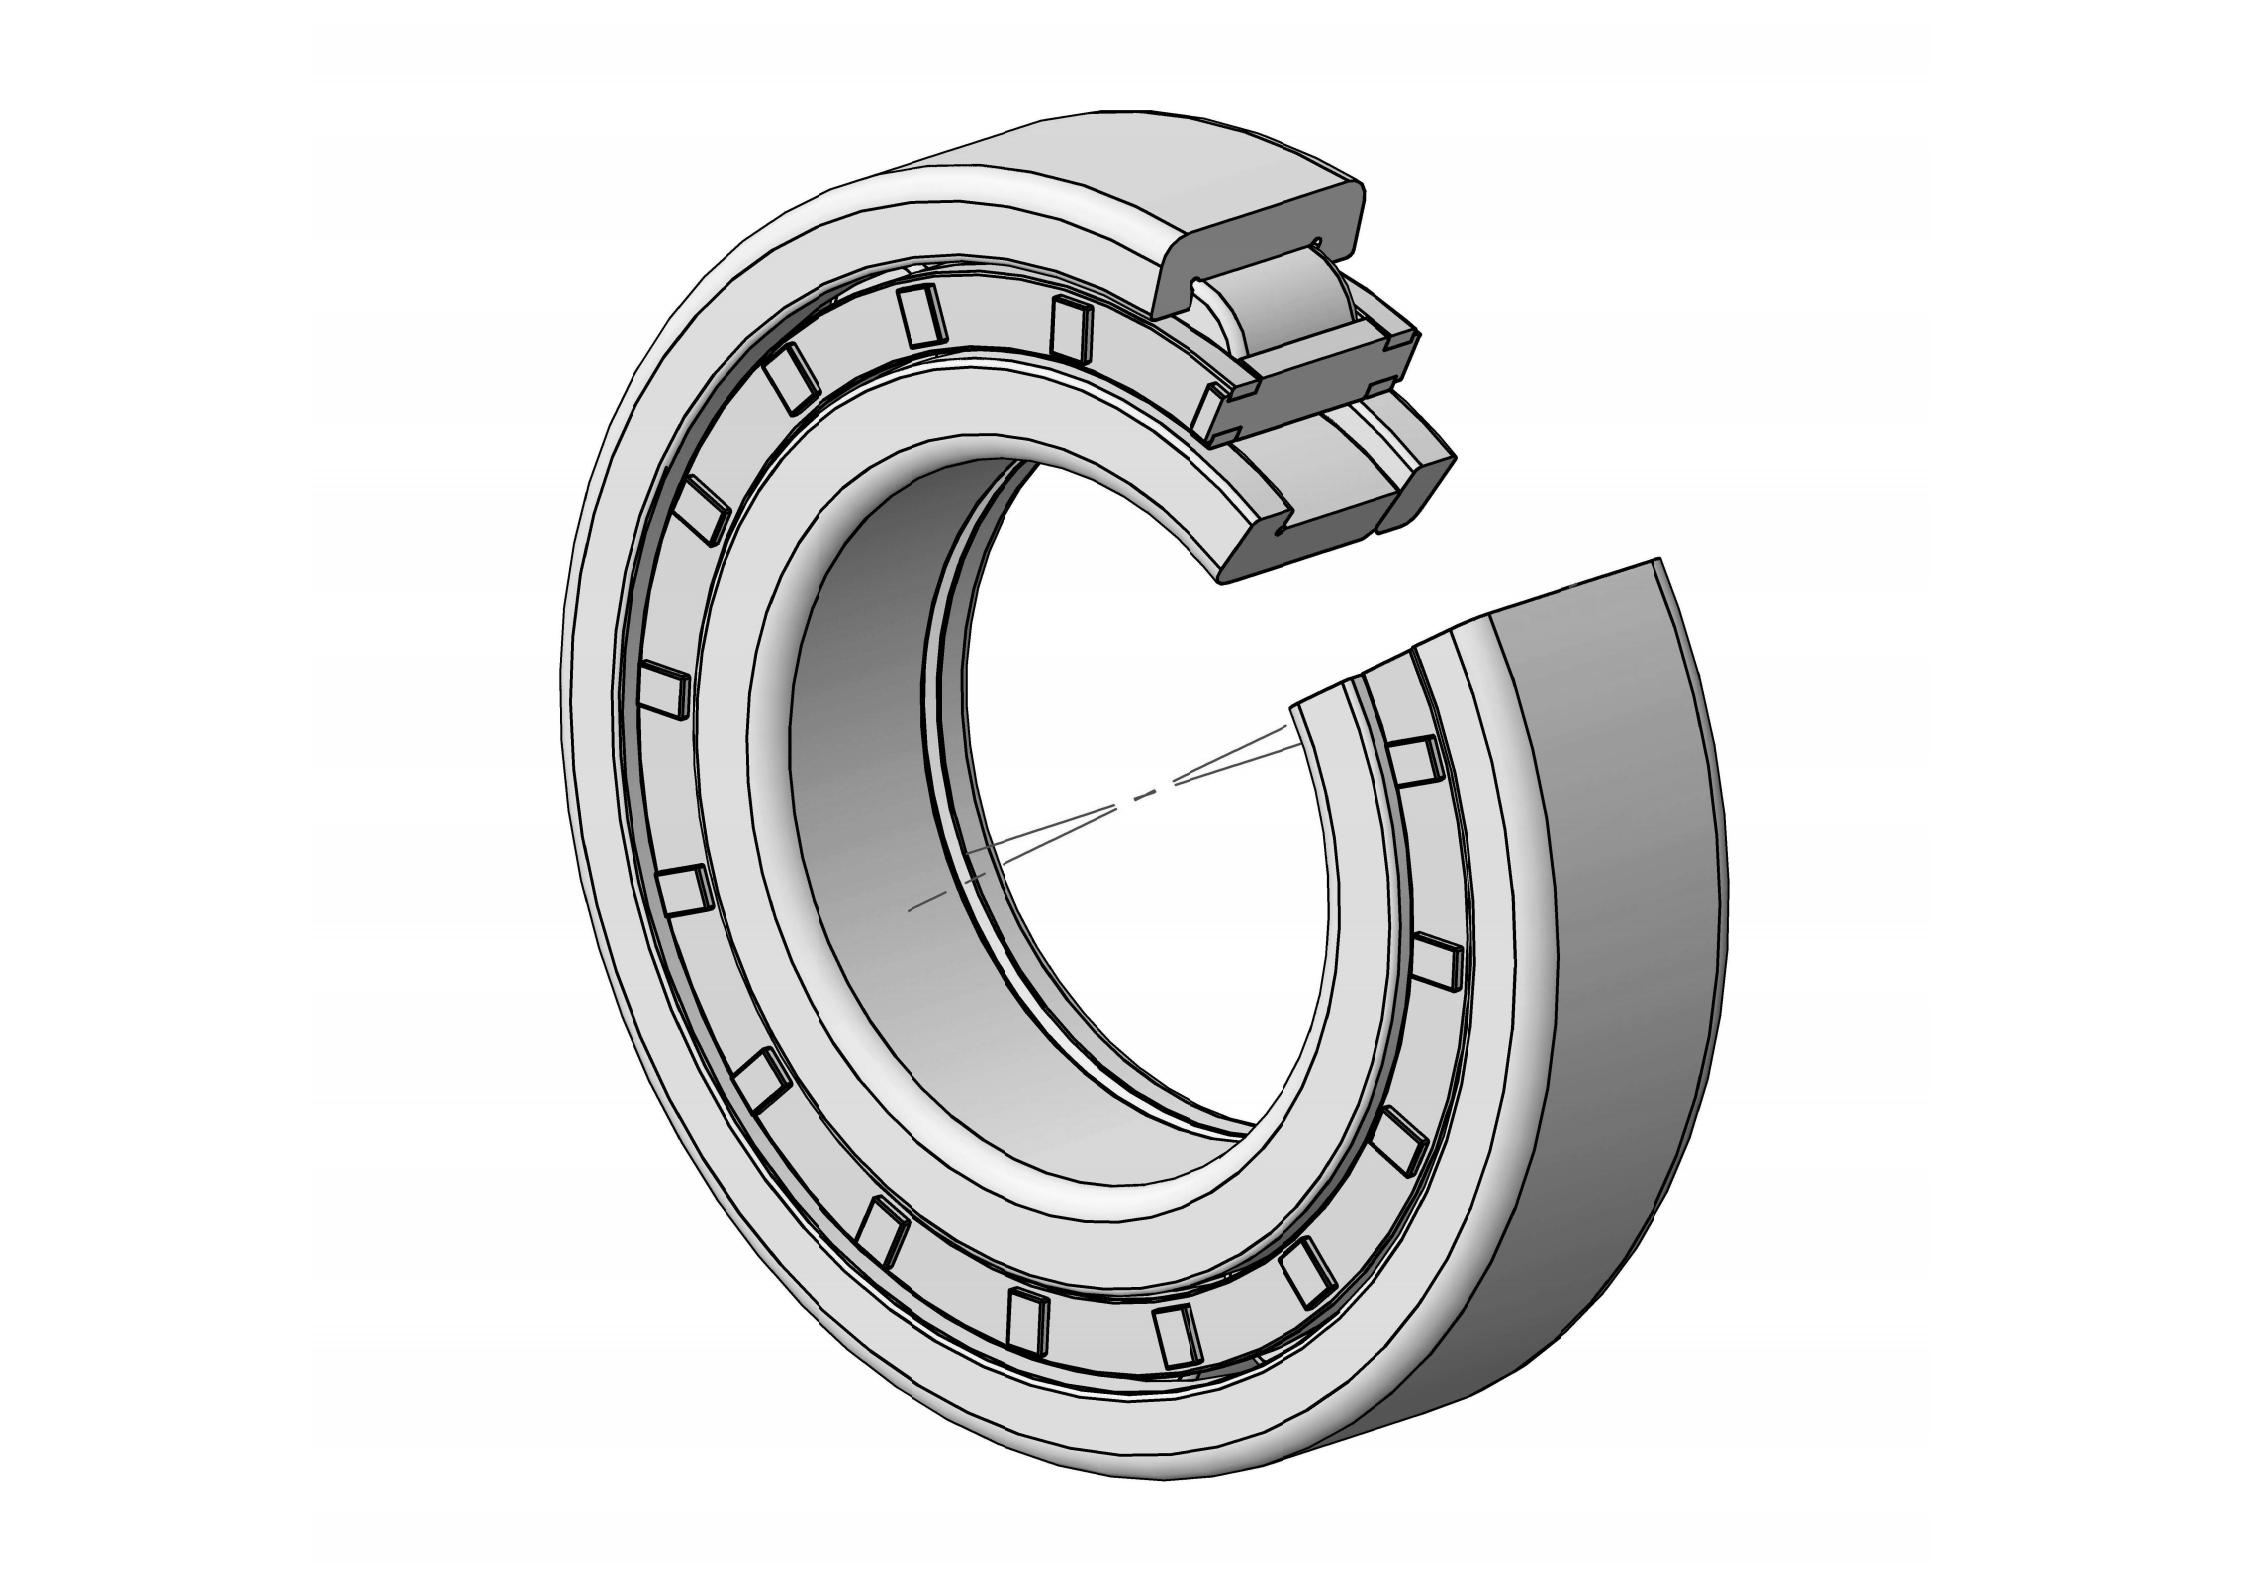 NUP305-E Single Row Cylindrical roller bearing 